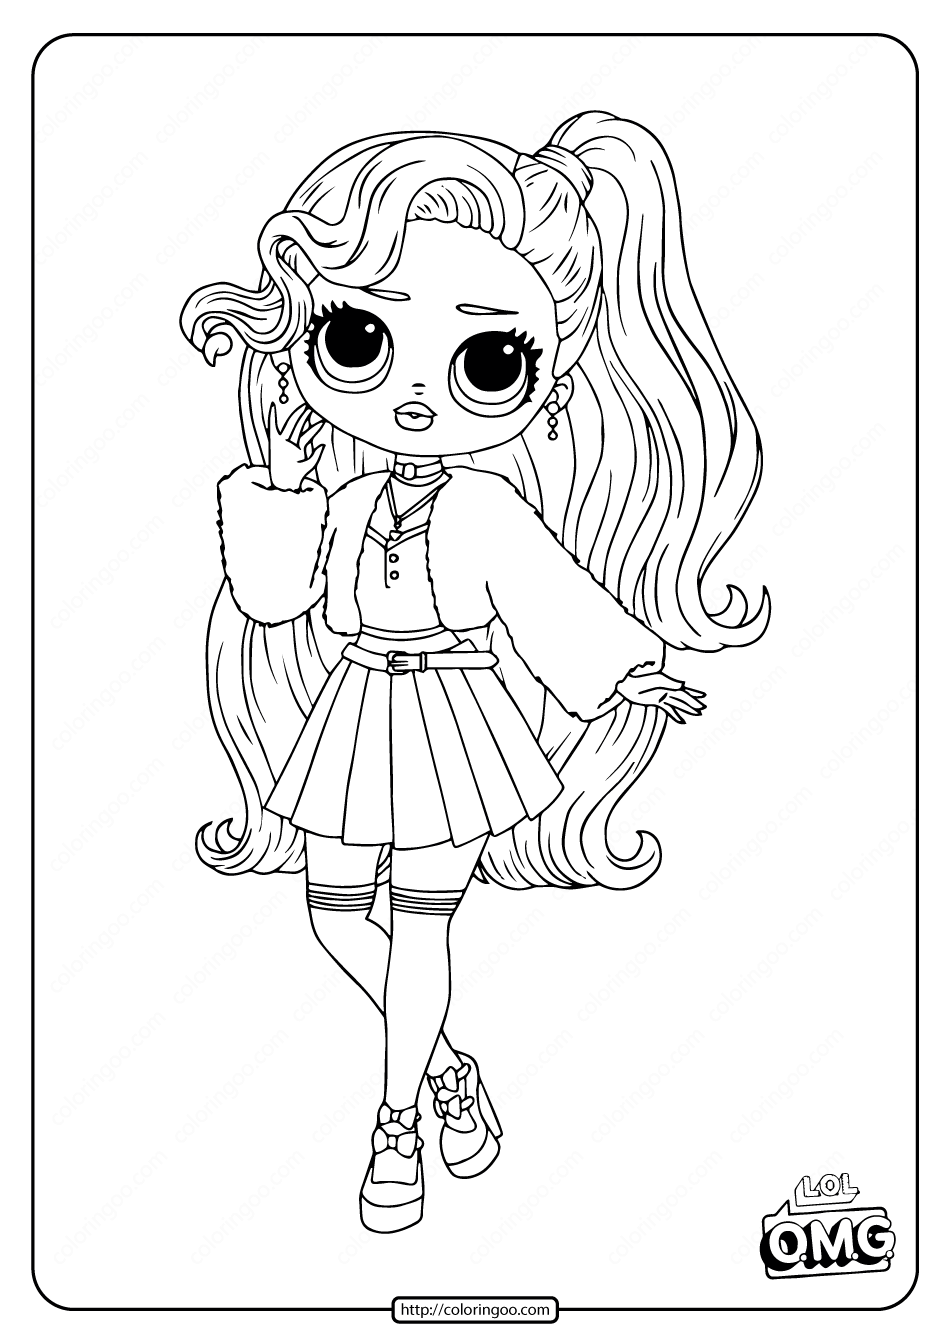 LOL Surprise OMG Pink Baby Coloring Page